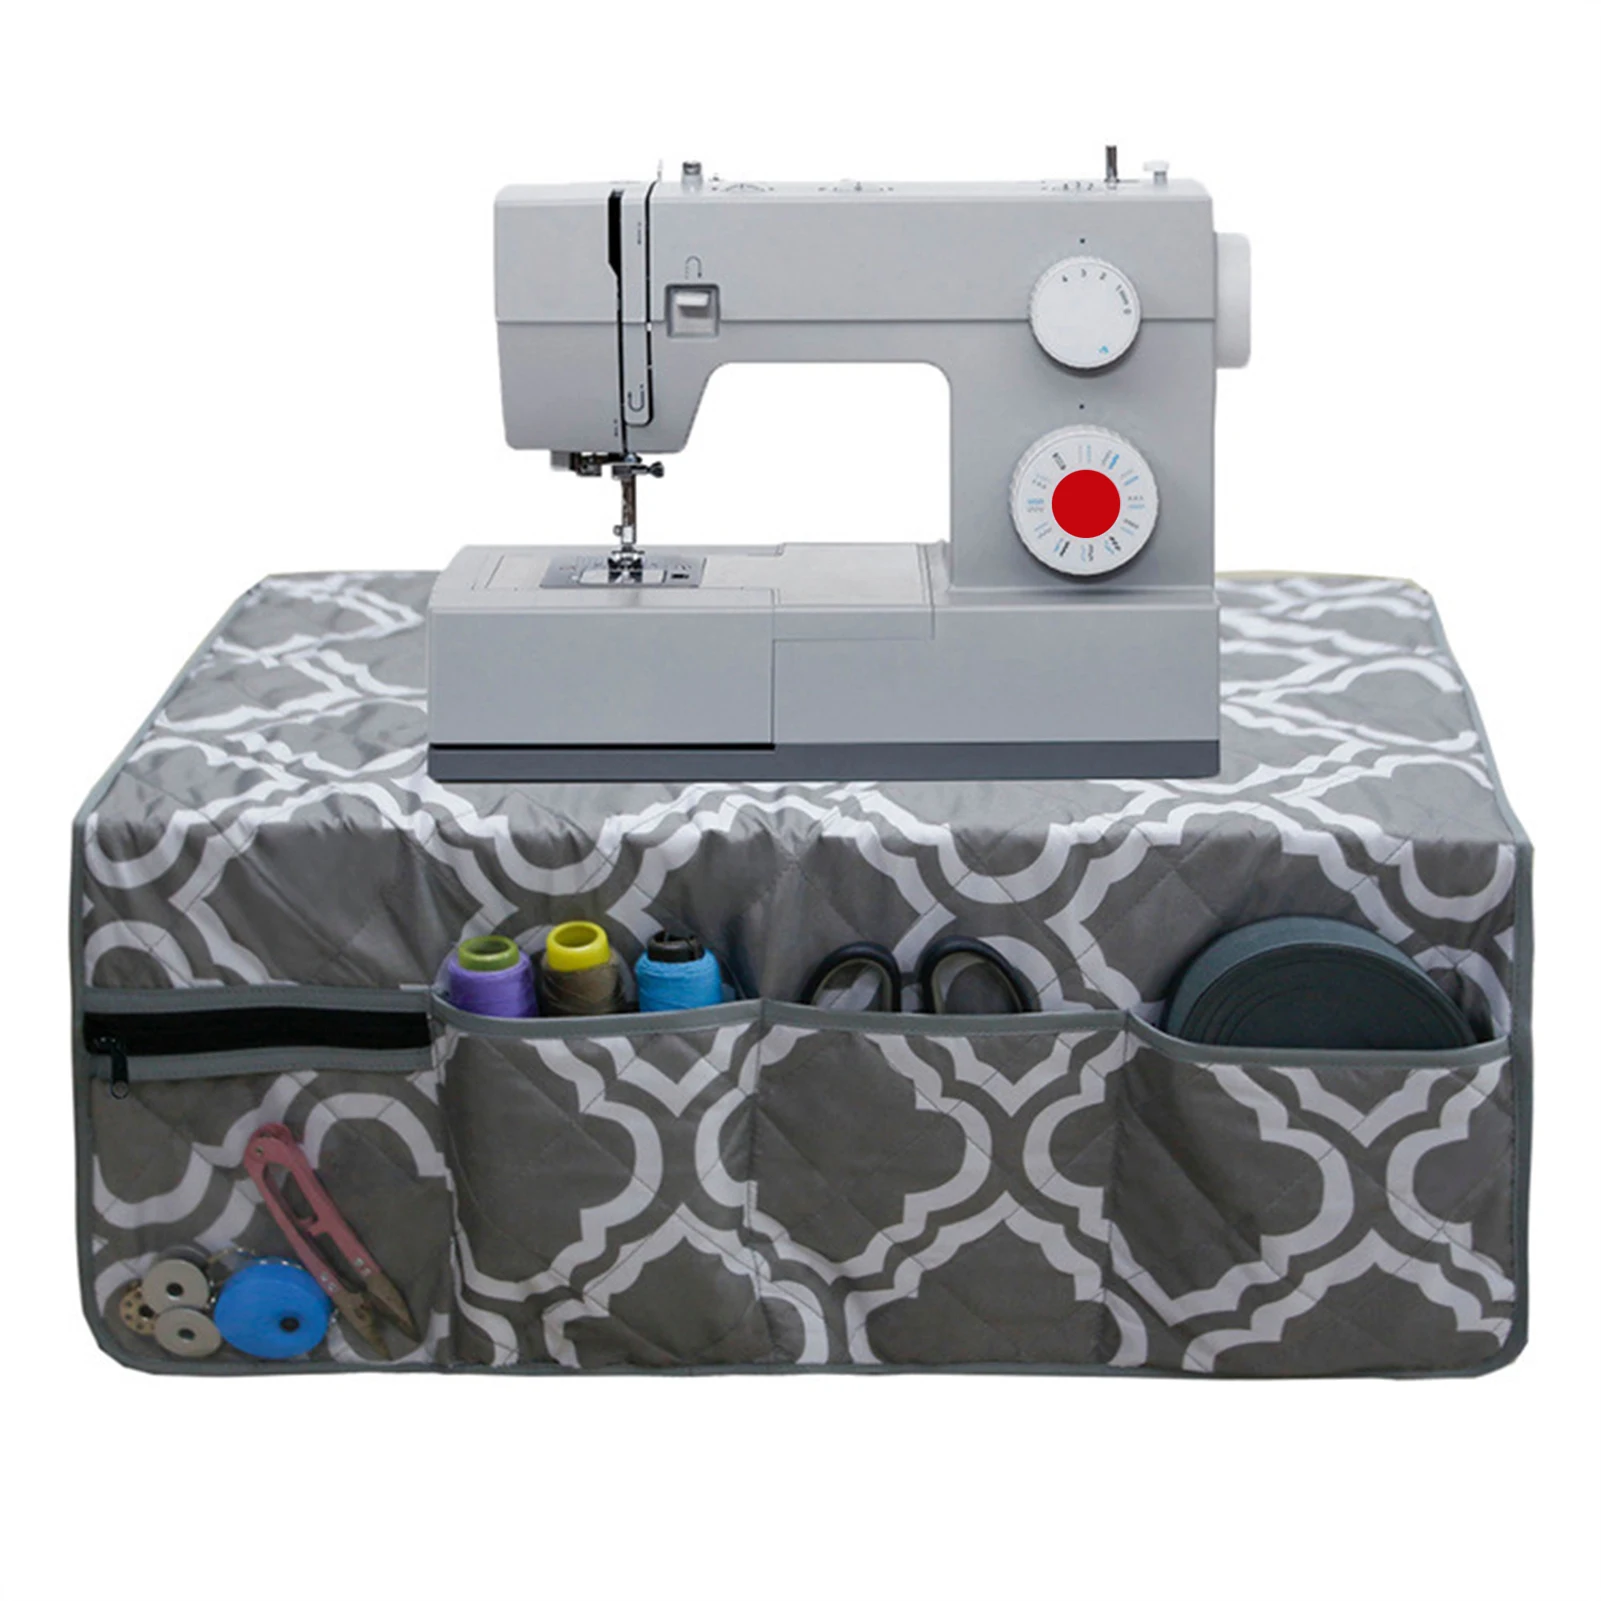 Suitable for Most Machine Standards Kitabetty Sewing Machine Dust Cover Sewing Machine Cover with Pockets for Extra Accessories Sewing Machine Cloth Storage Bag 